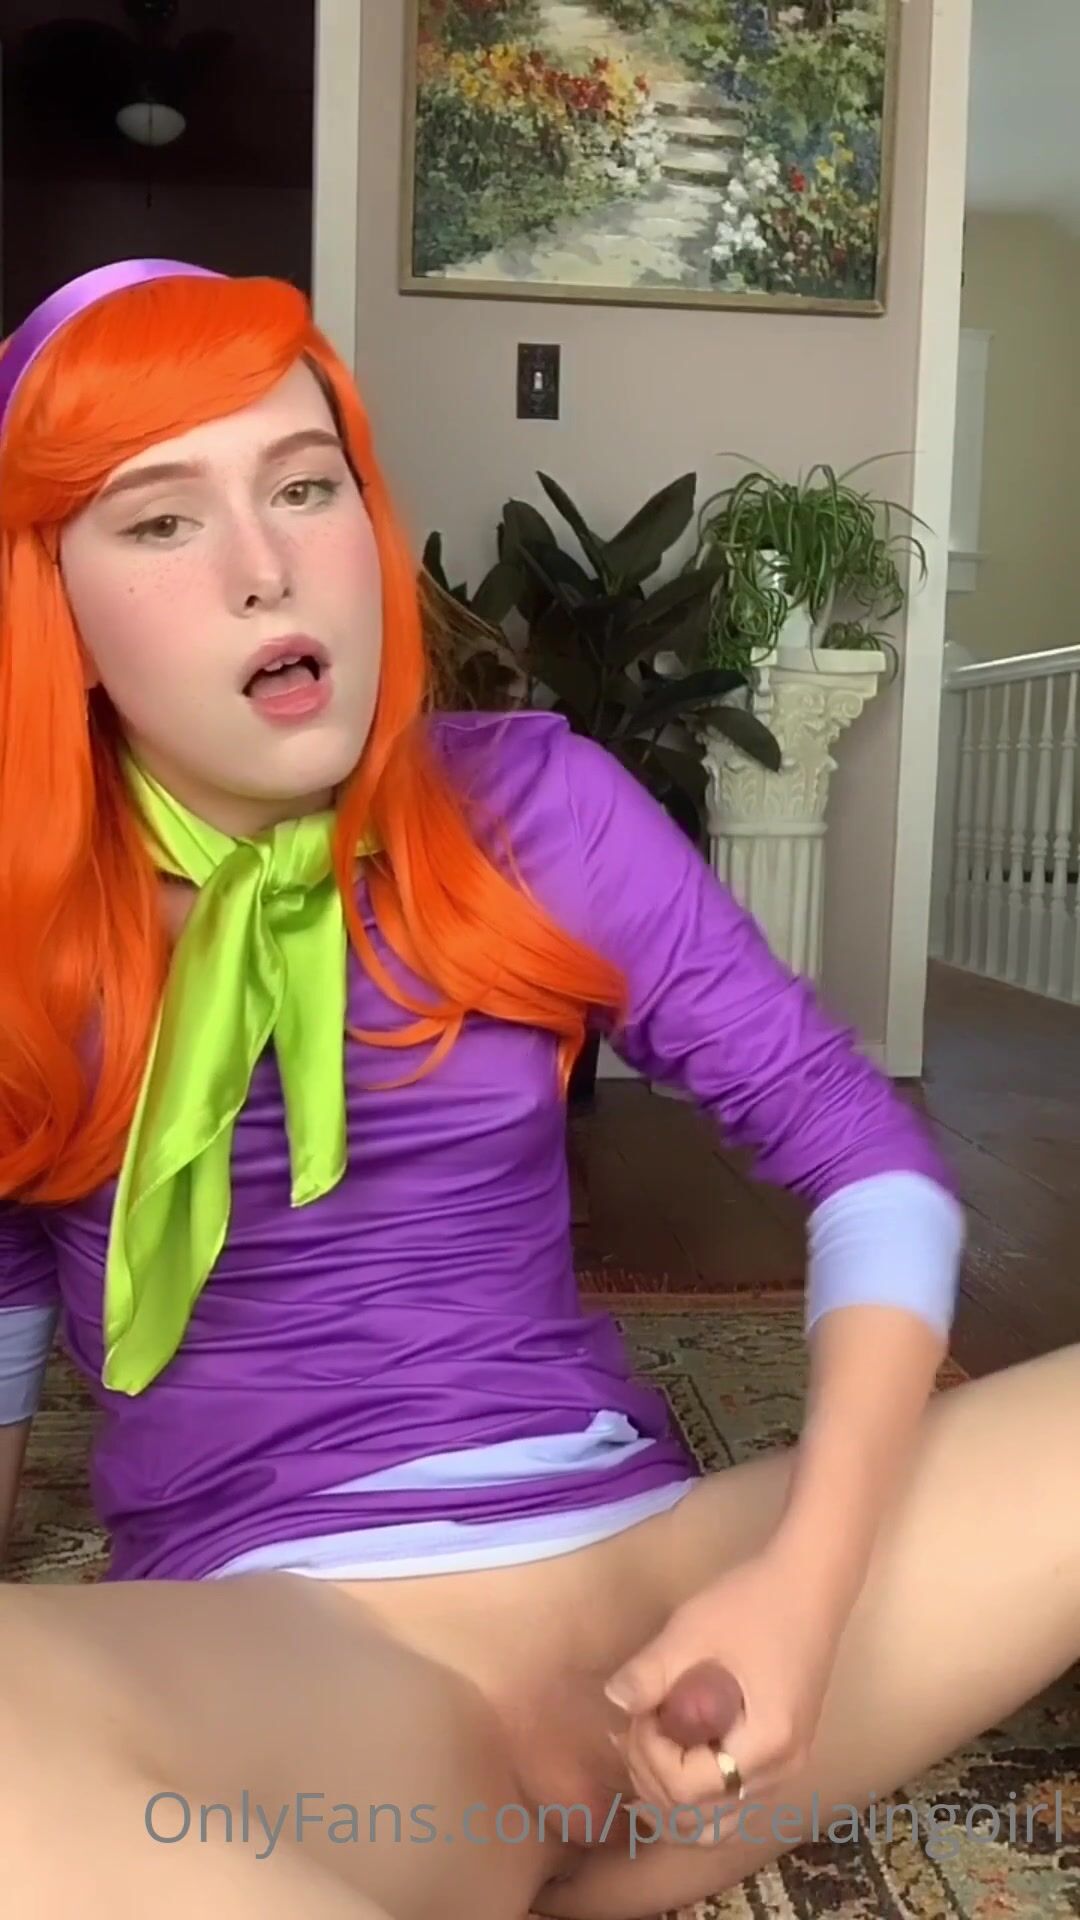 Daphne gets sucked and jerks off